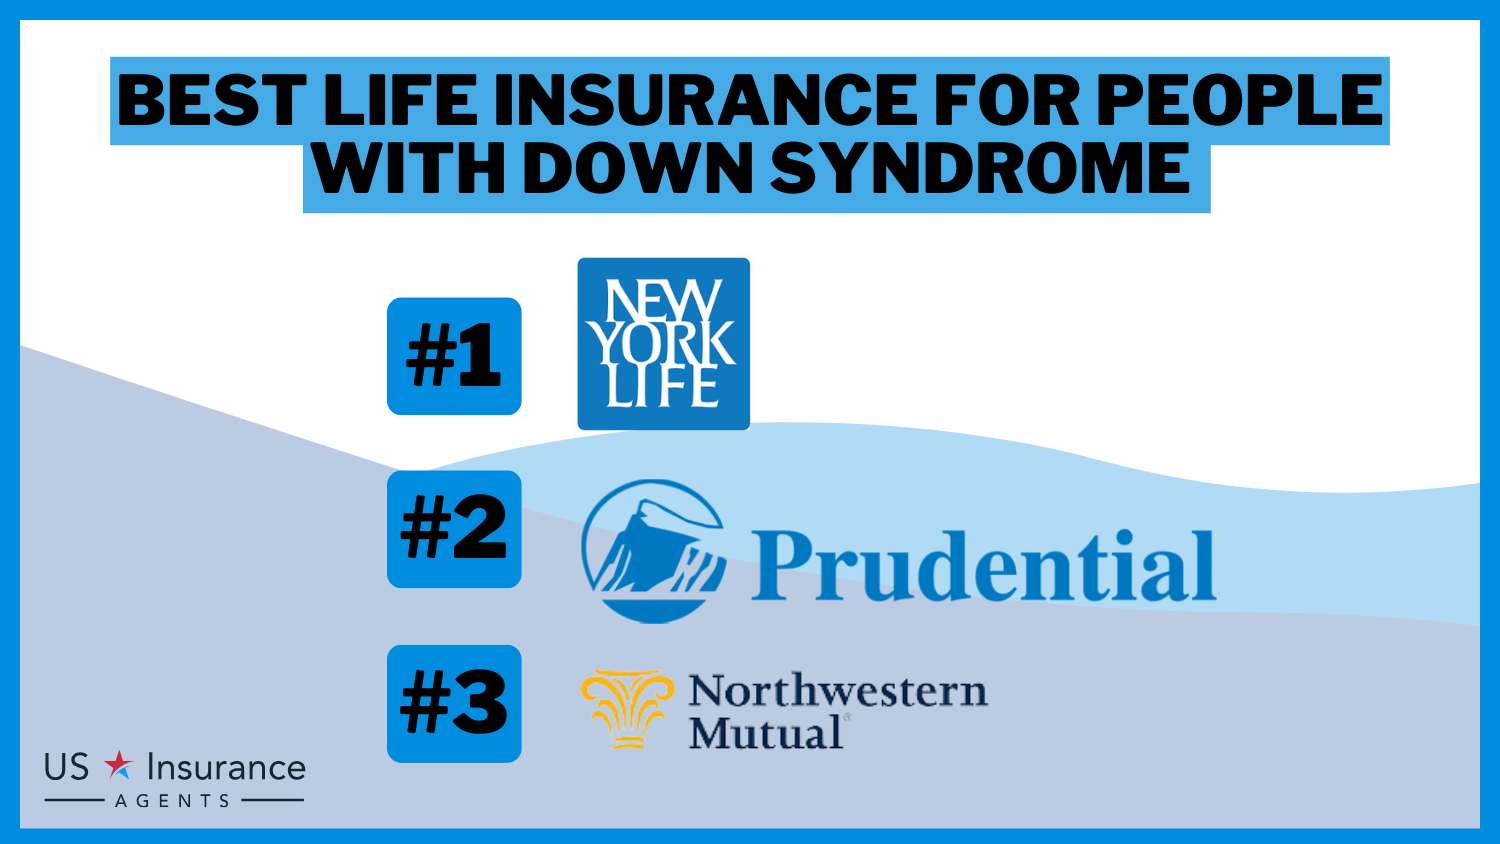 Best Life Insurance for People With Down Syndrome